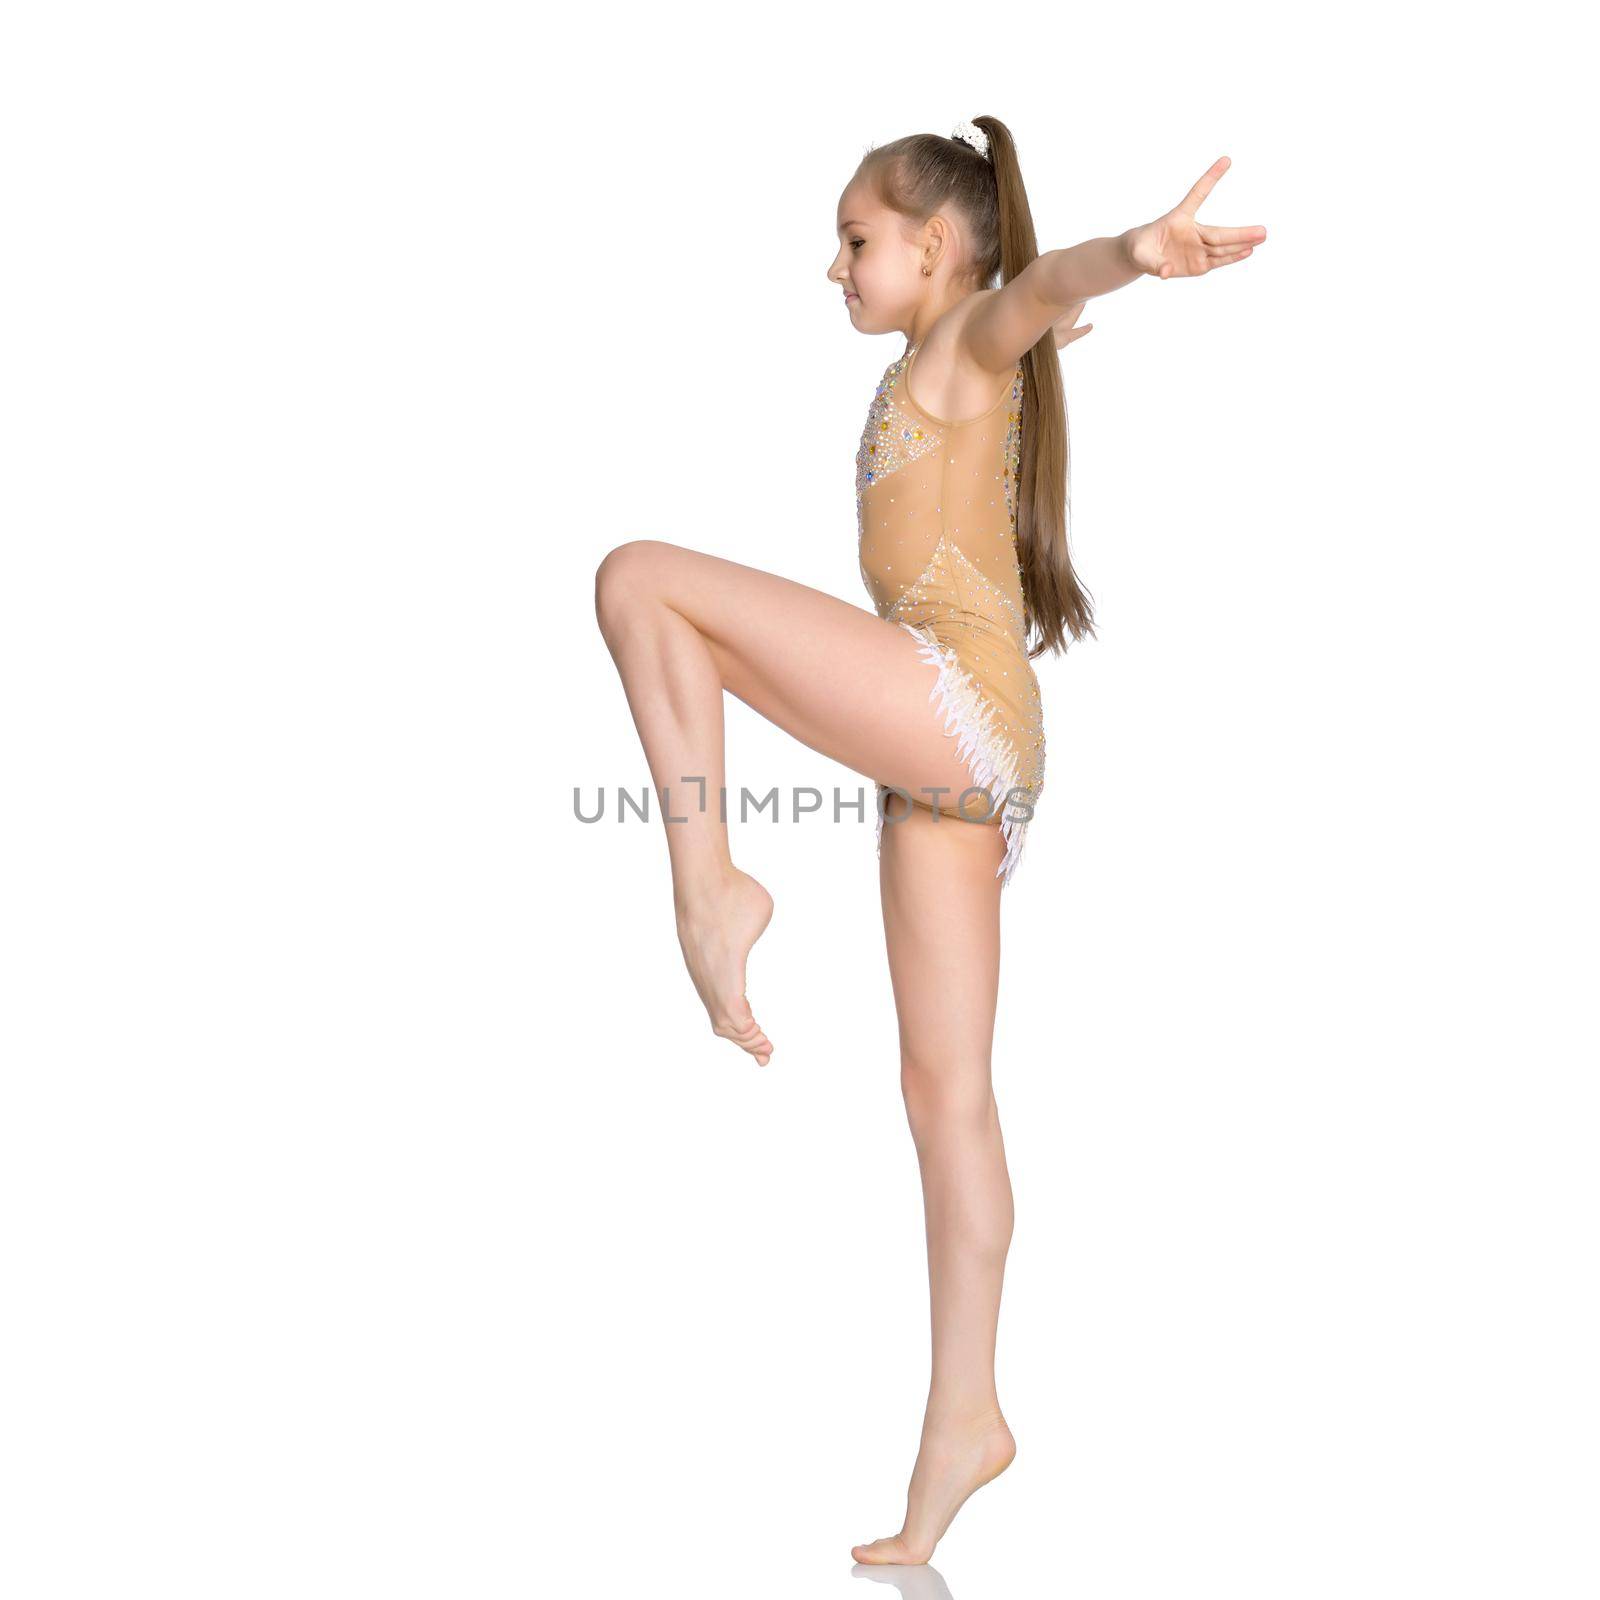 little girl gymnast performs an exercise. Balance on one leg with a grip. Sport concept, gymnastics, fitness. Isolated on white background.